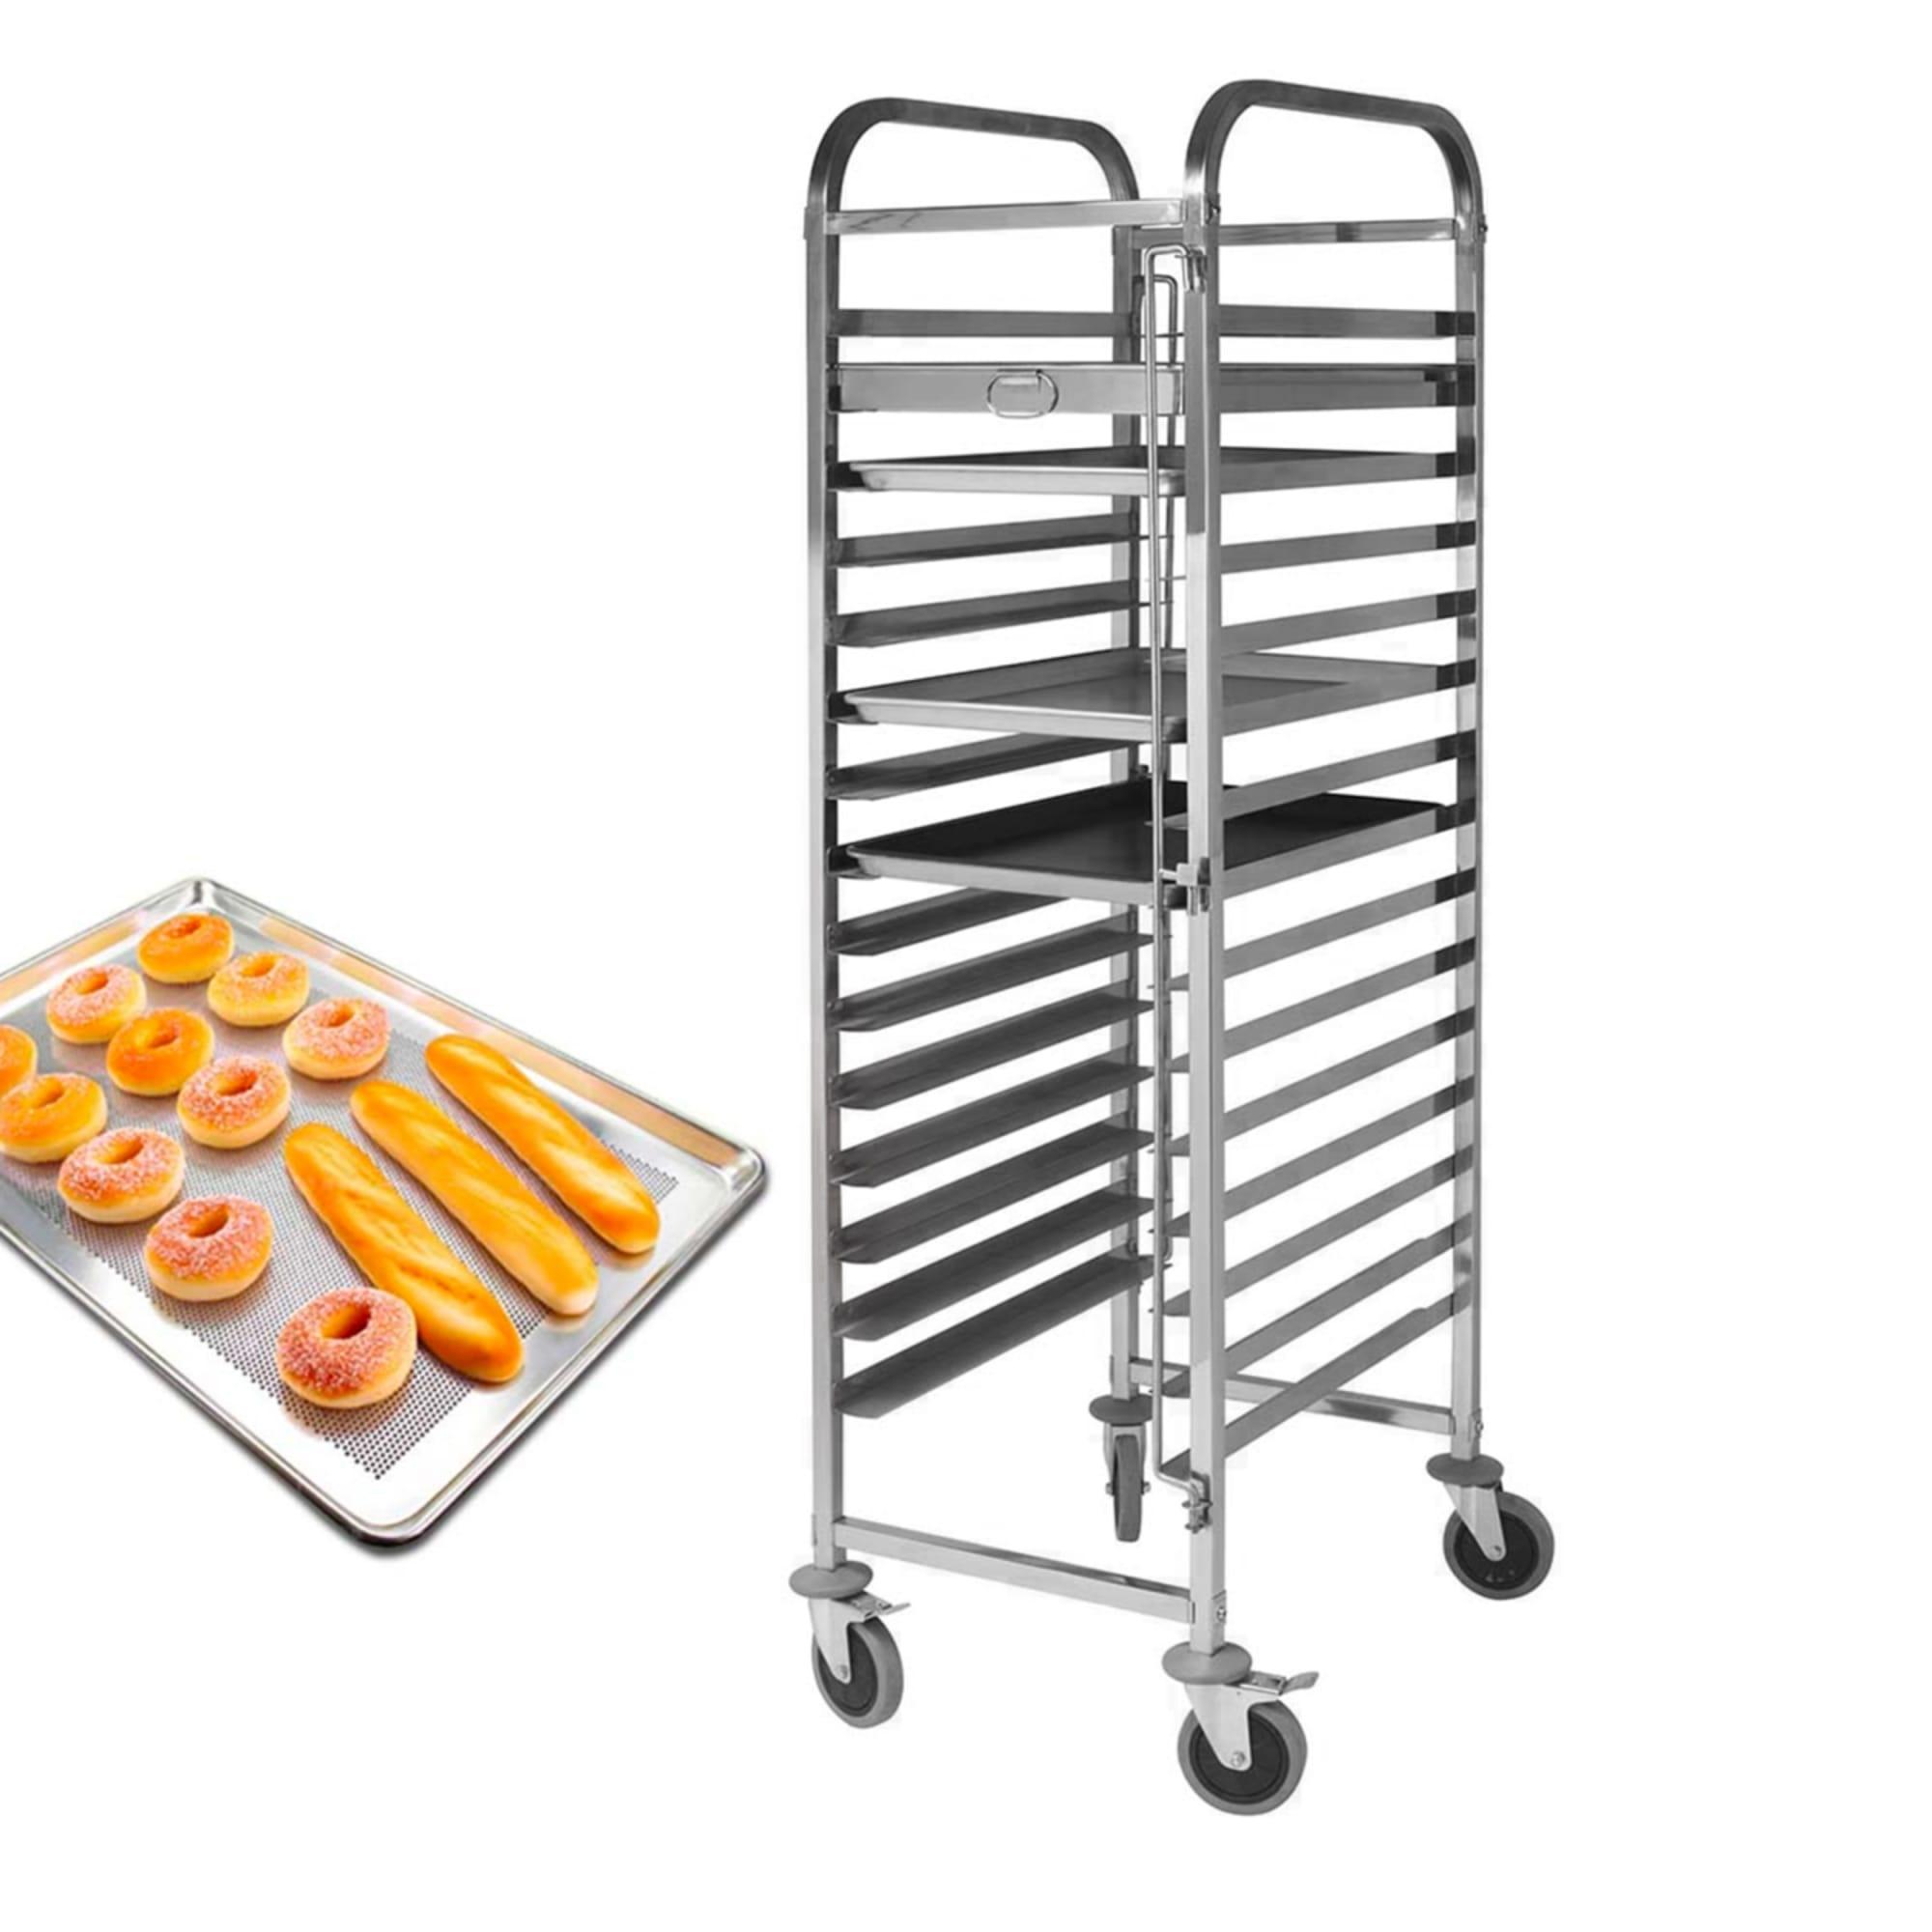 Soga Stainless Steel Gastronorm Trolley 15 Tier Suits 60x40cm Trays Image 3